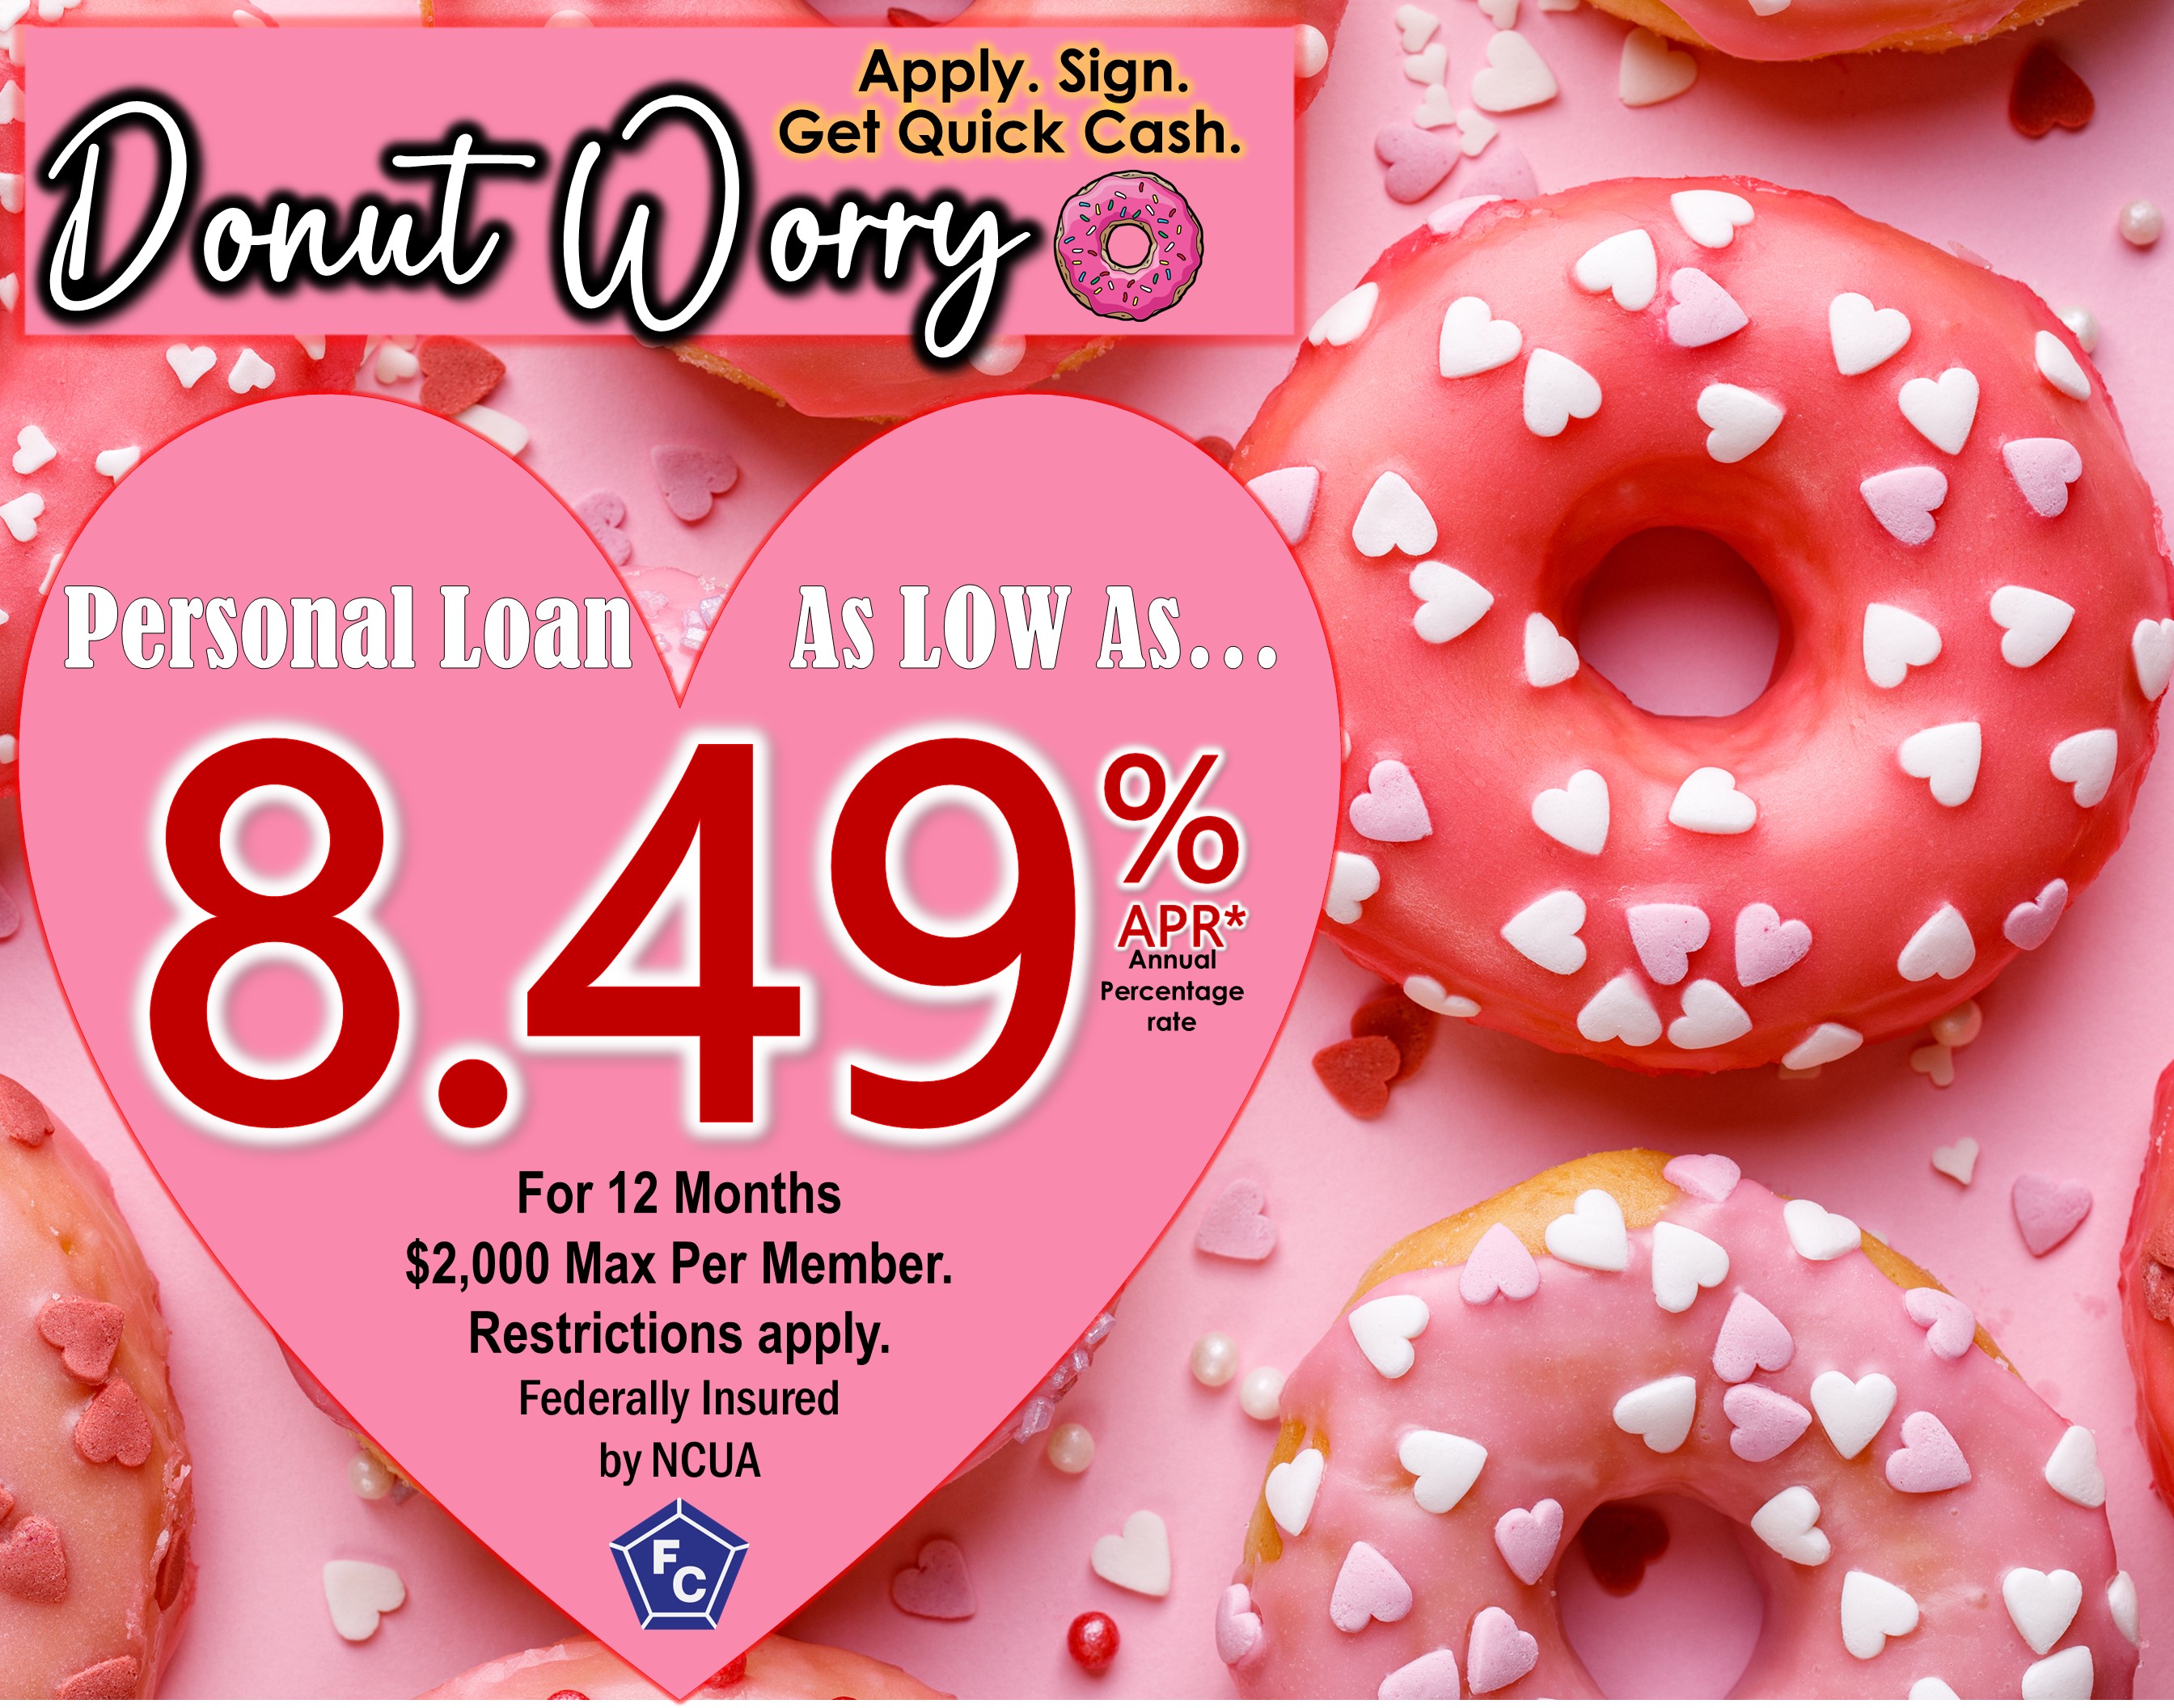 Donut Worry Personal Loan Promotion